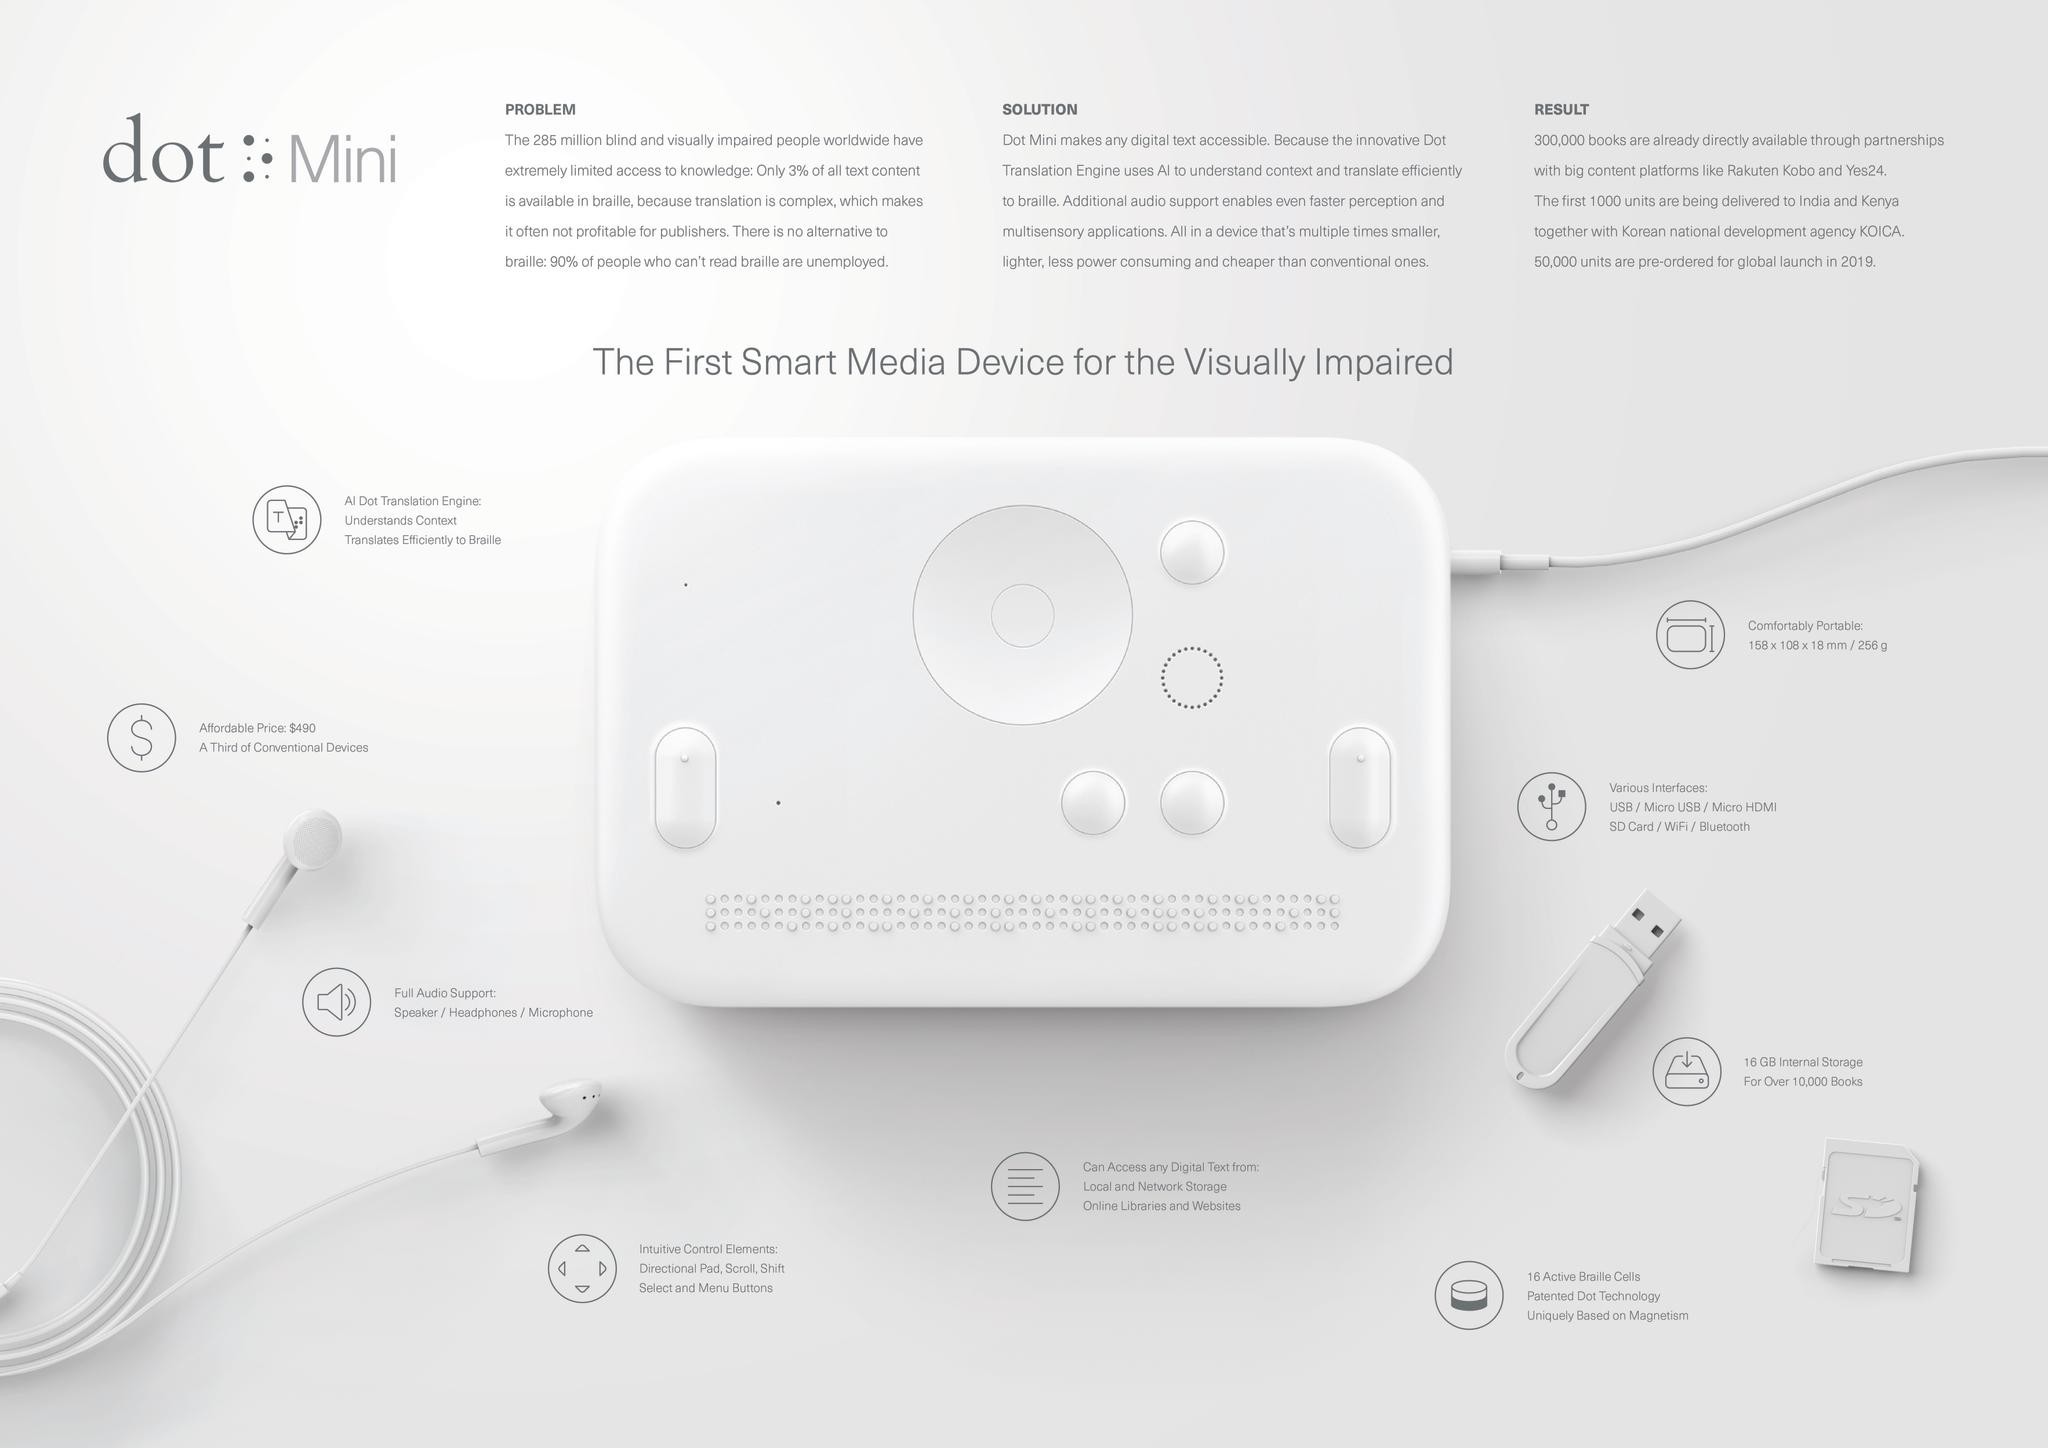 DOT MINI. THE FIRST SMART MEDIA DEVICE FOR THE VISUALLY IMPAIRED.